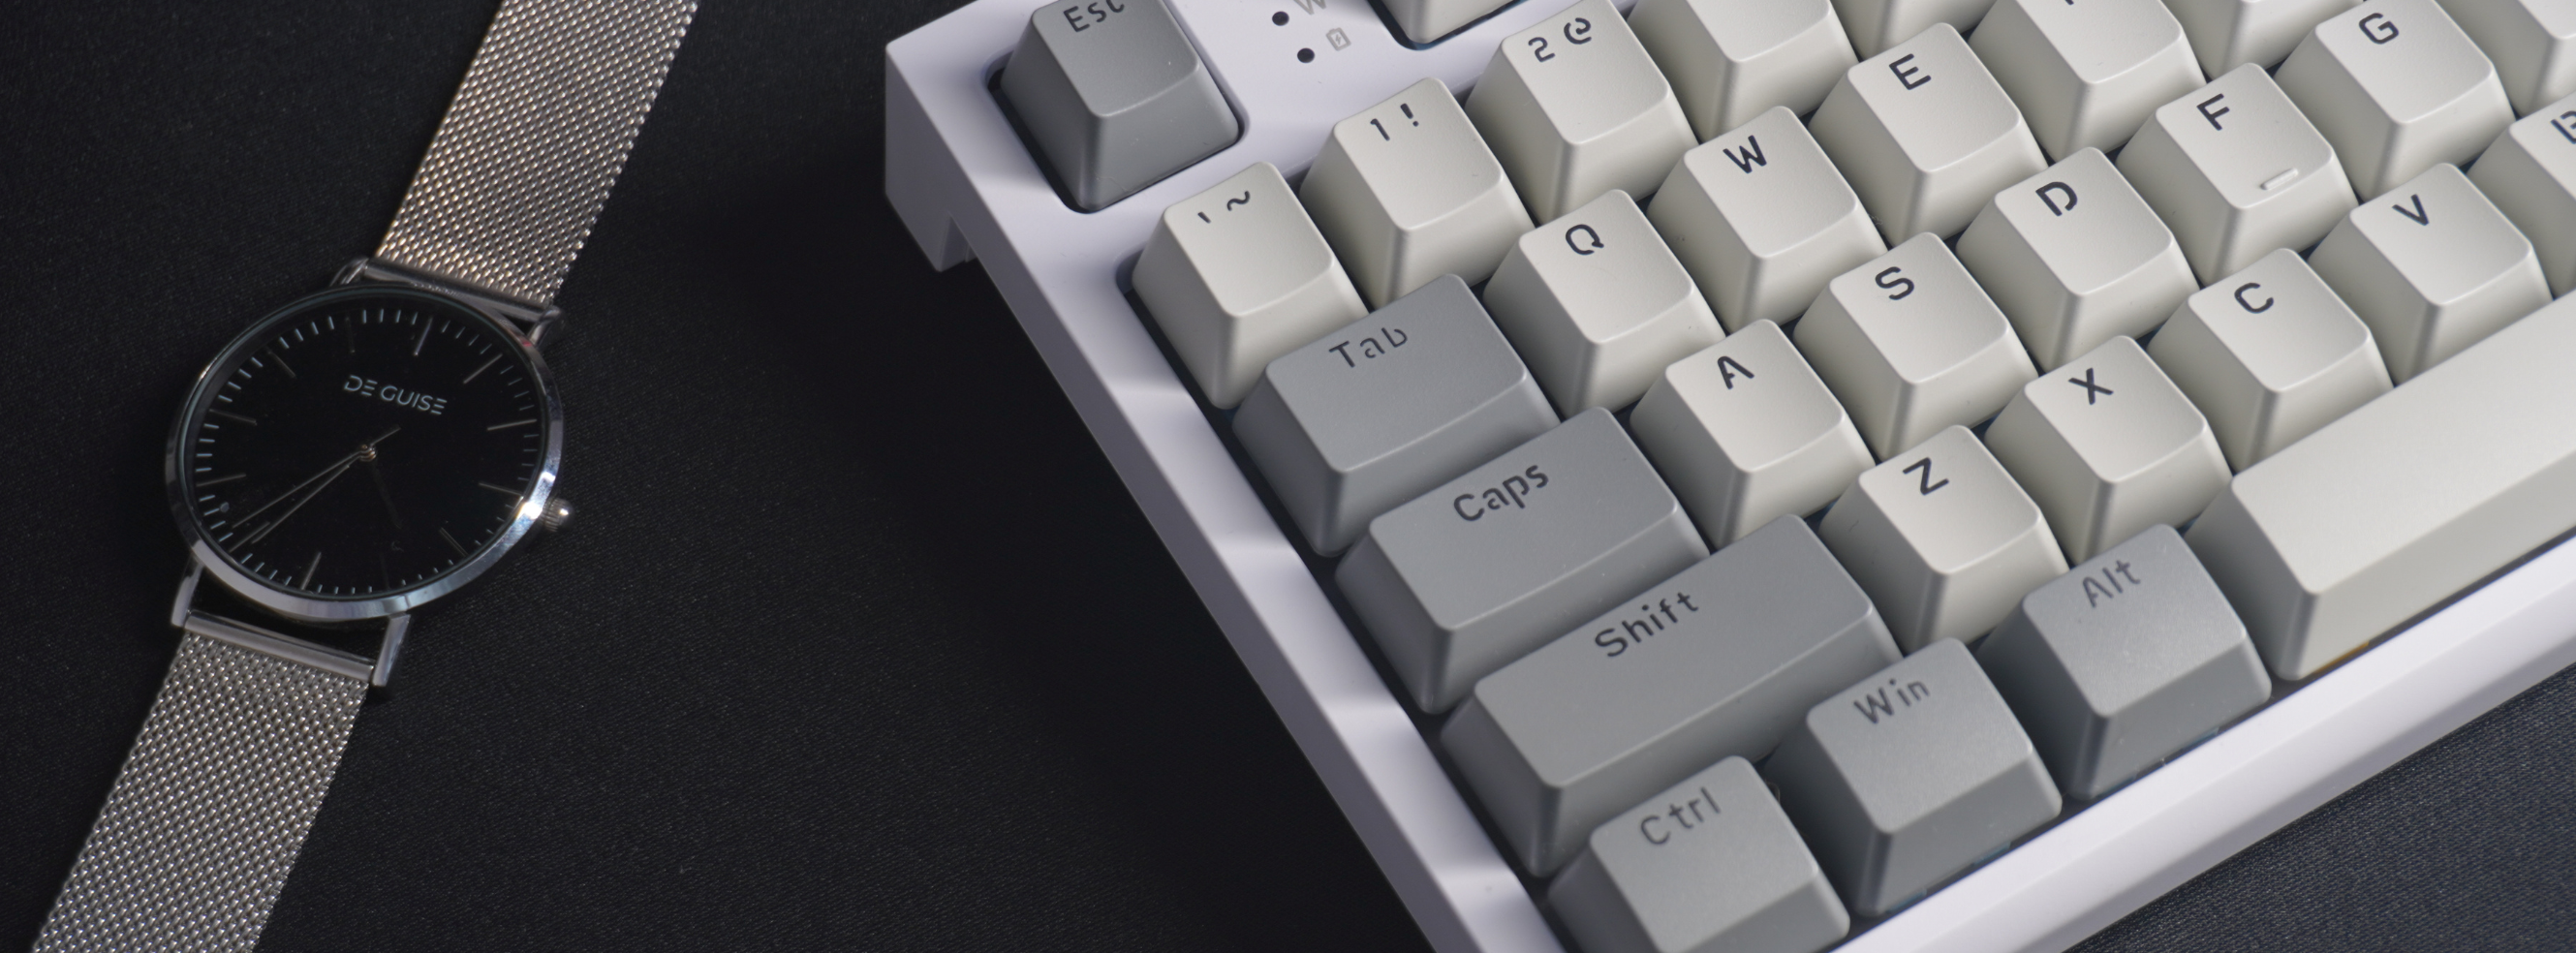 This is a detail Photo of the K86 Attack Shark TKL Business Grey variant mechanical keyboard on a desk with a black desk mat, taken from above on a 45degree angle